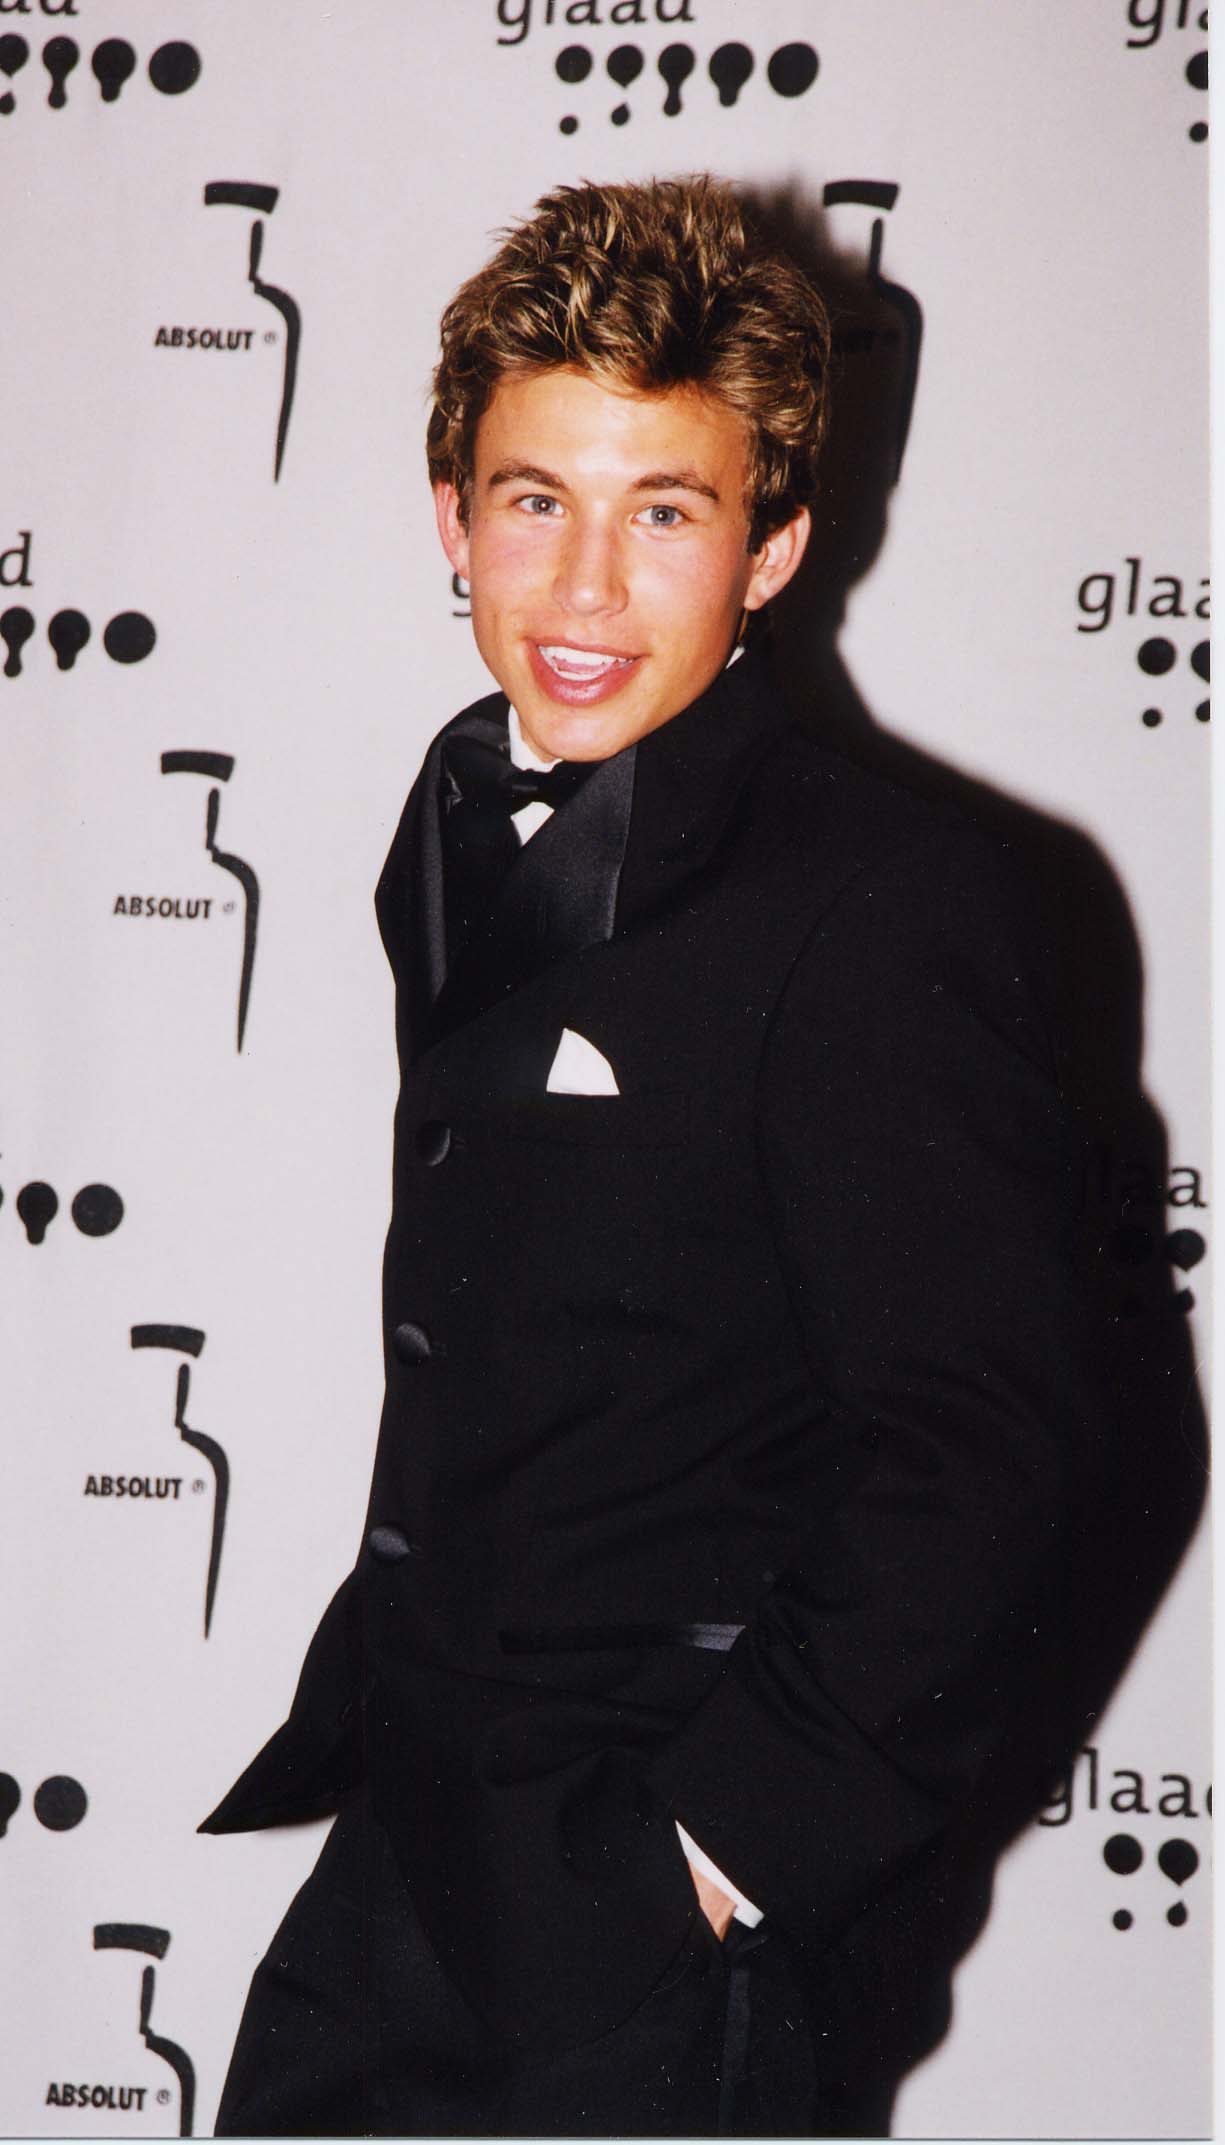 Jonathan Taylor Thomas pendant les GLAAD Media Awards le 15 avril 2000 à Los Angeles, Californie | Source : Getty Images